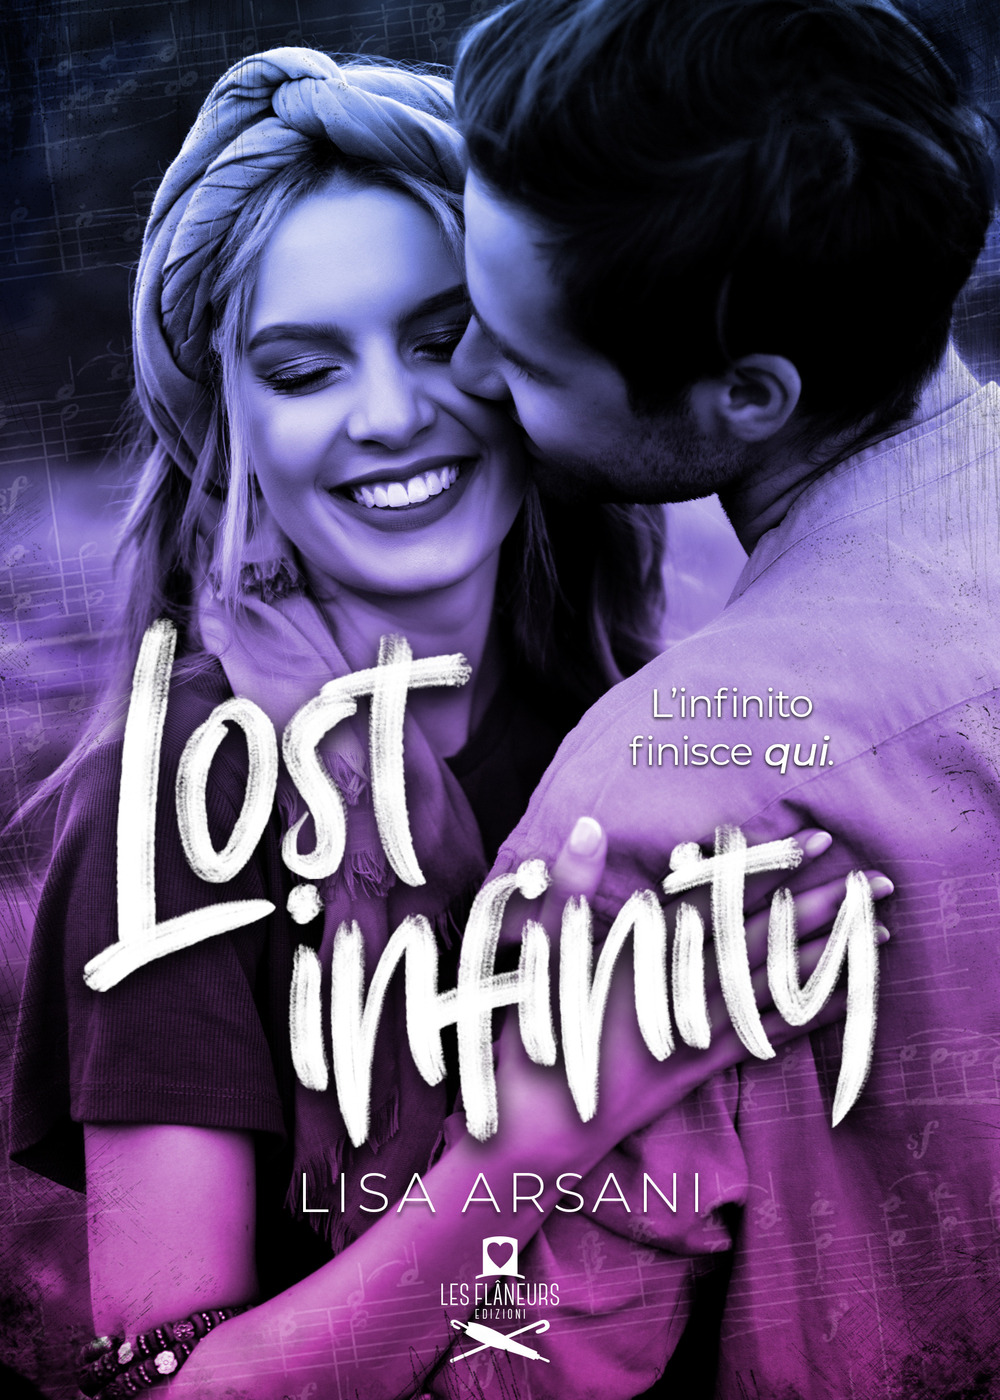 Lost infinity